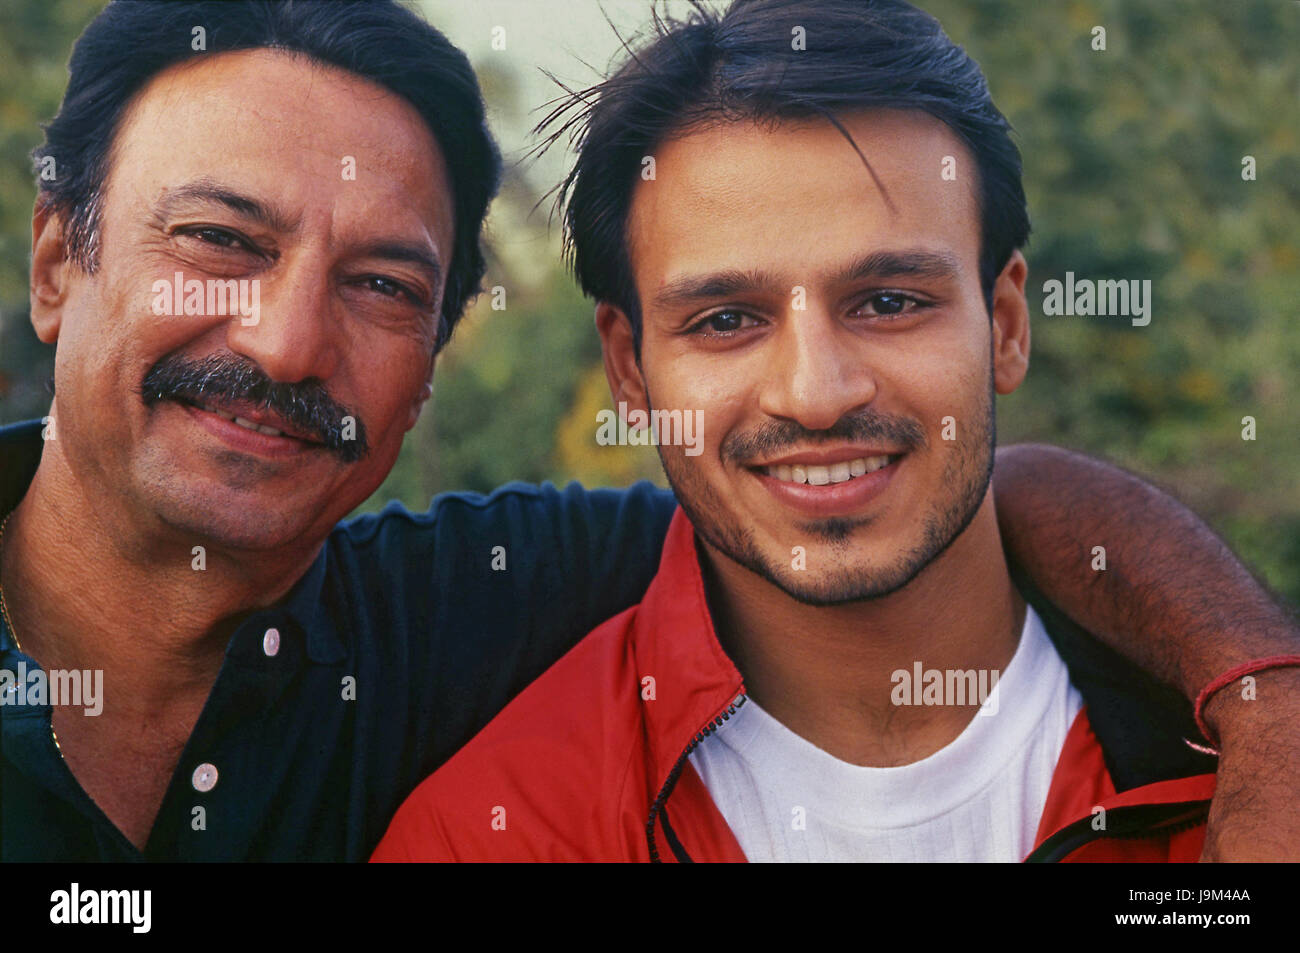 Collection Of Over 999 Incredible Vivek Oberoi Images Stunning Full 4k Picture Compilation